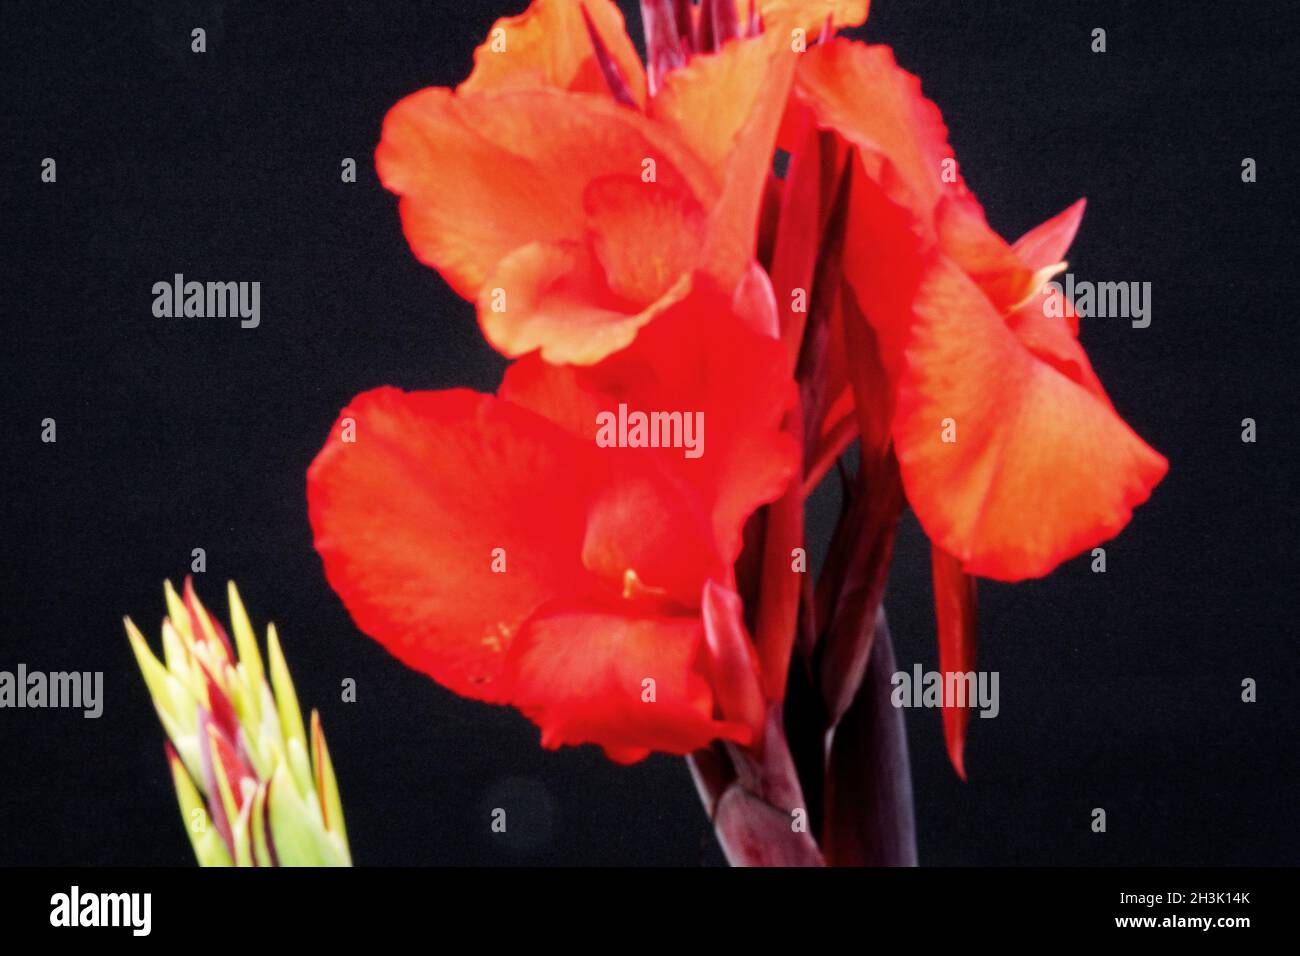 Red flower with black background Stock Photo